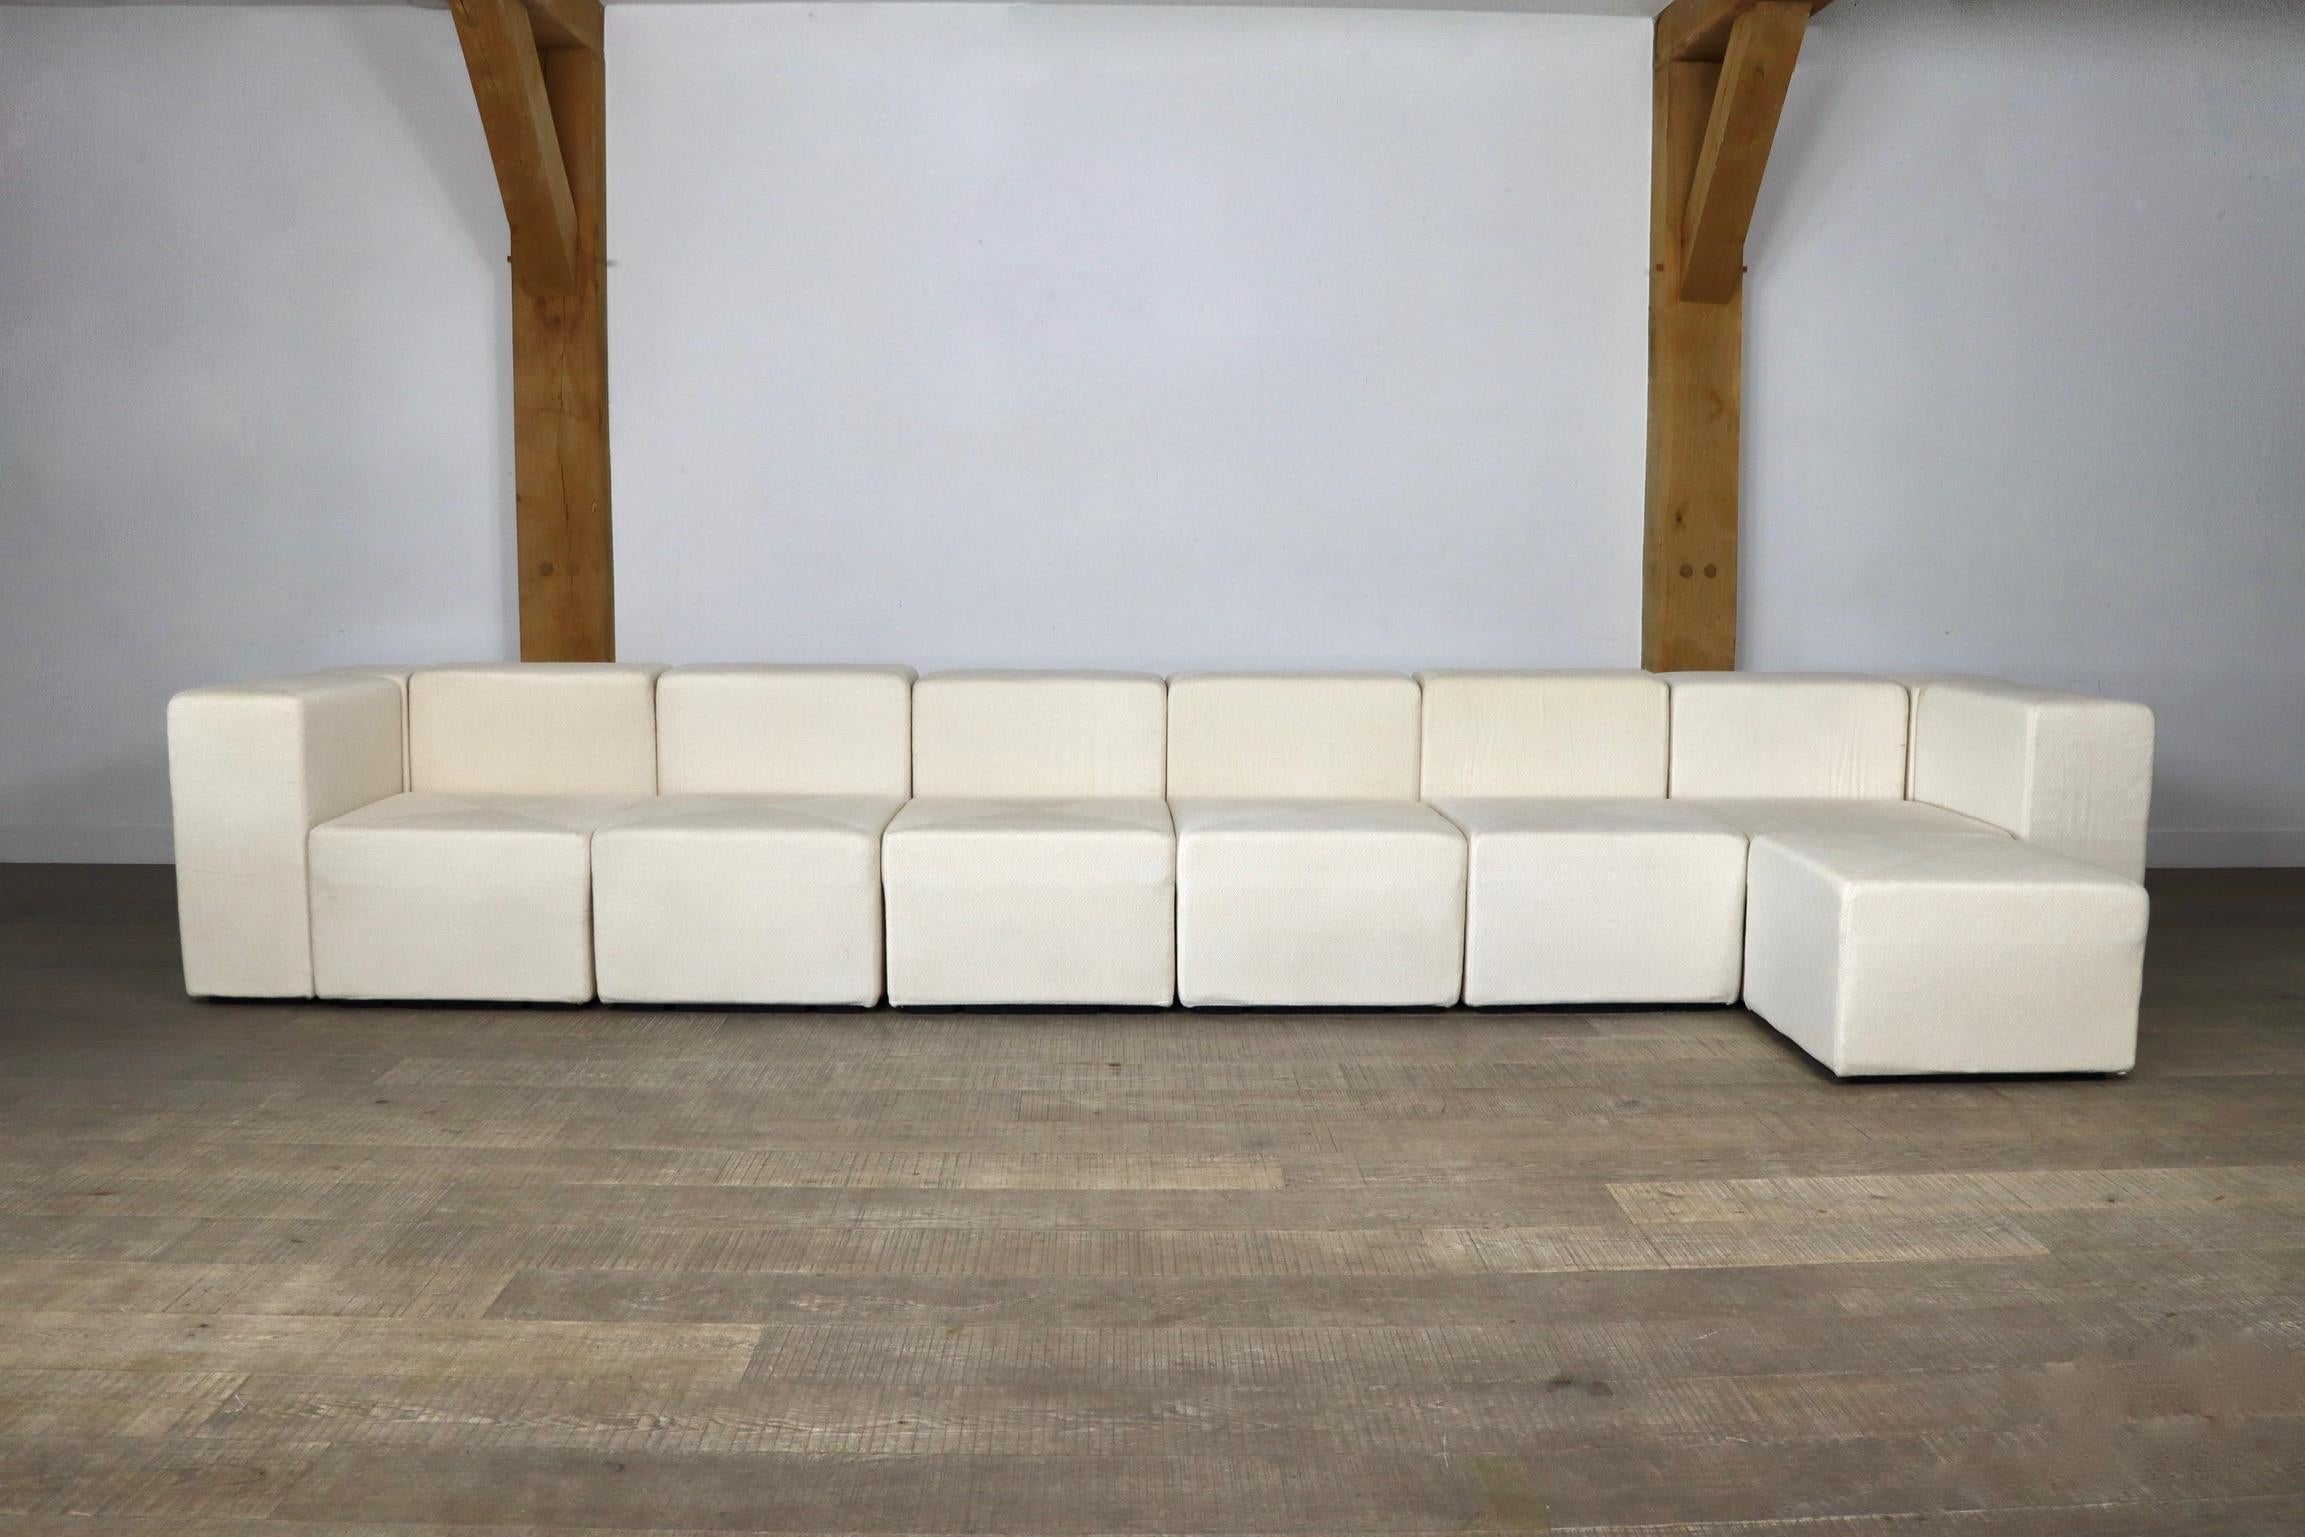 Beautiful modular 'Sistema 61' sofa by Giancarlo Piretti for Castelli, Italy 1970s. 
The modular sofa consists of seven seatings, seven backrests and two corner columns, which can be linked together on the underside with metal clamps. The original